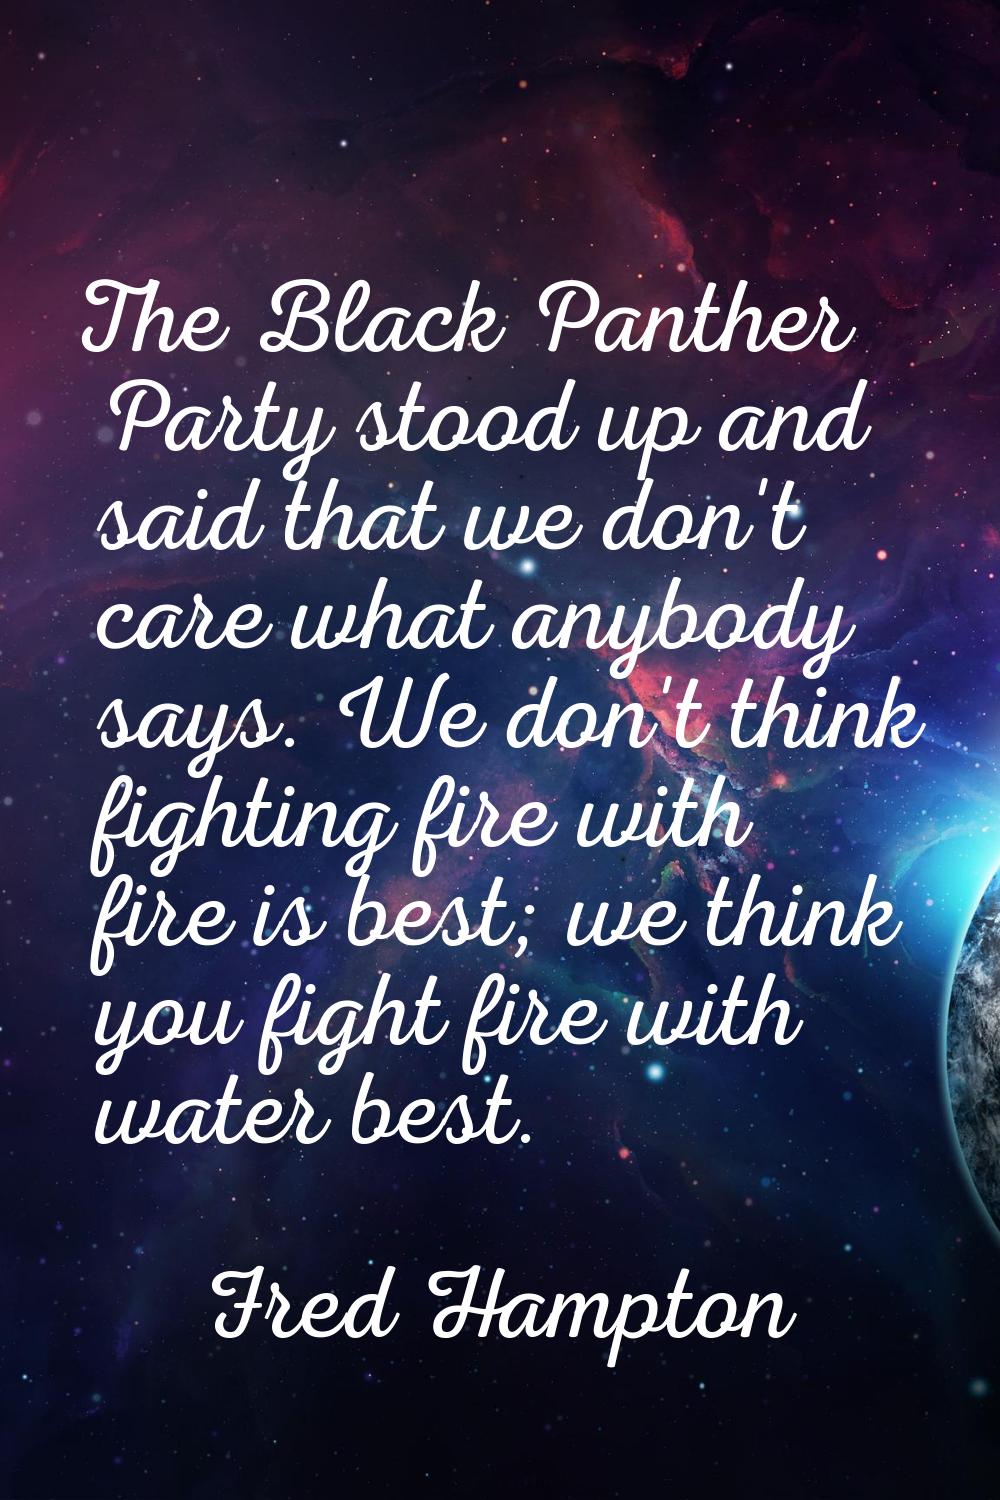 The Black Panther Party stood up and said that we don't care what anybody says. We don't think figh